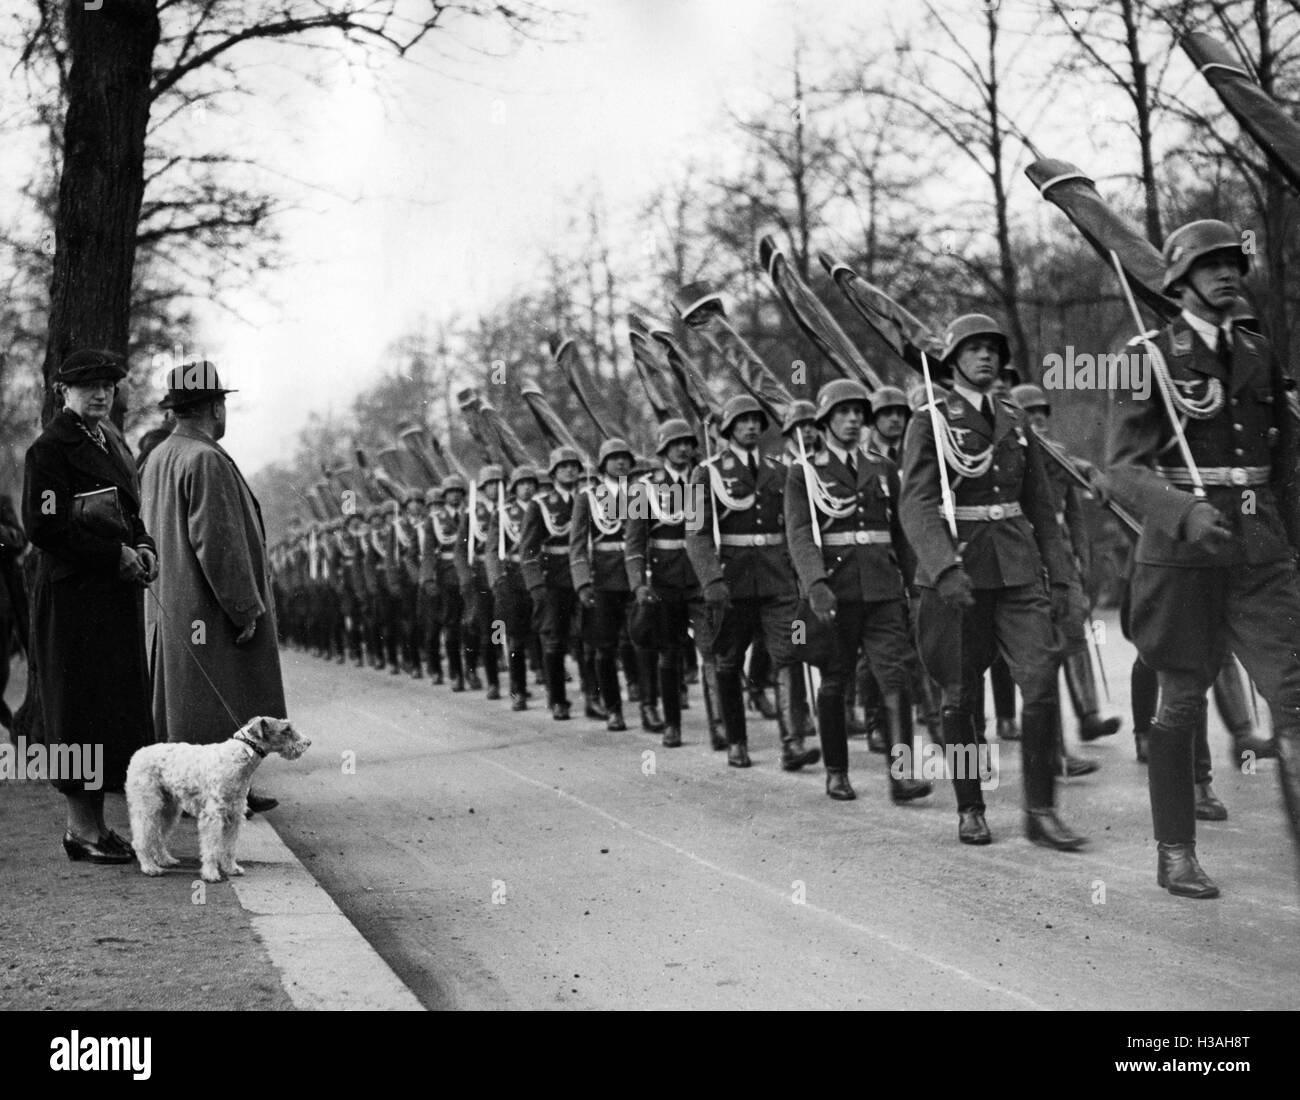 March past of soldiers of the Luftwaffe to a flag consecration, 1937 Stock Photo